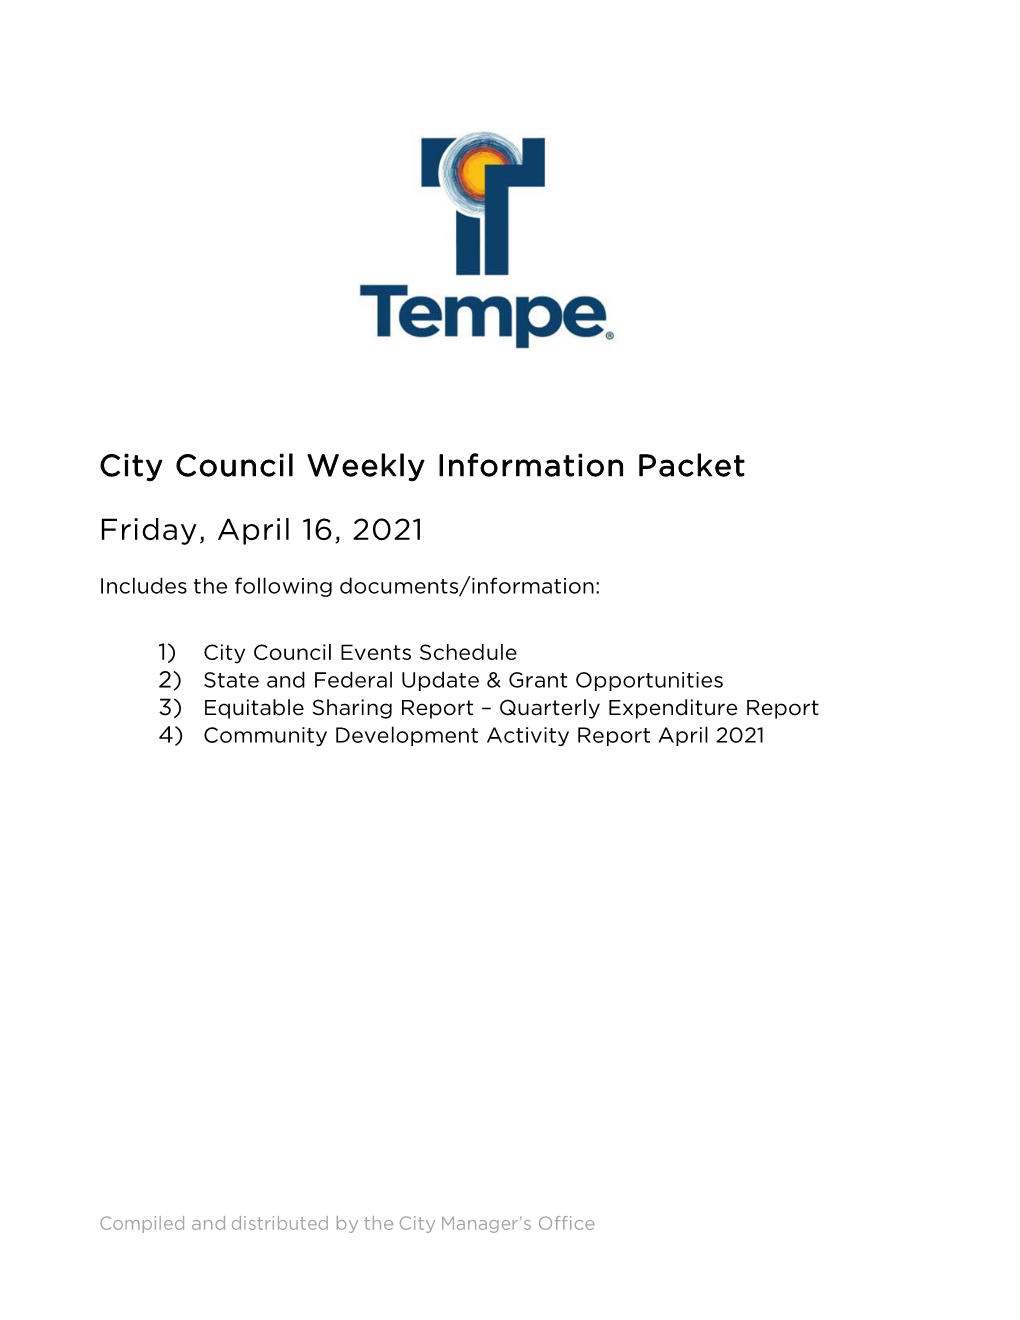 City Council Weekly Information Packet Friday, April 16, 2021